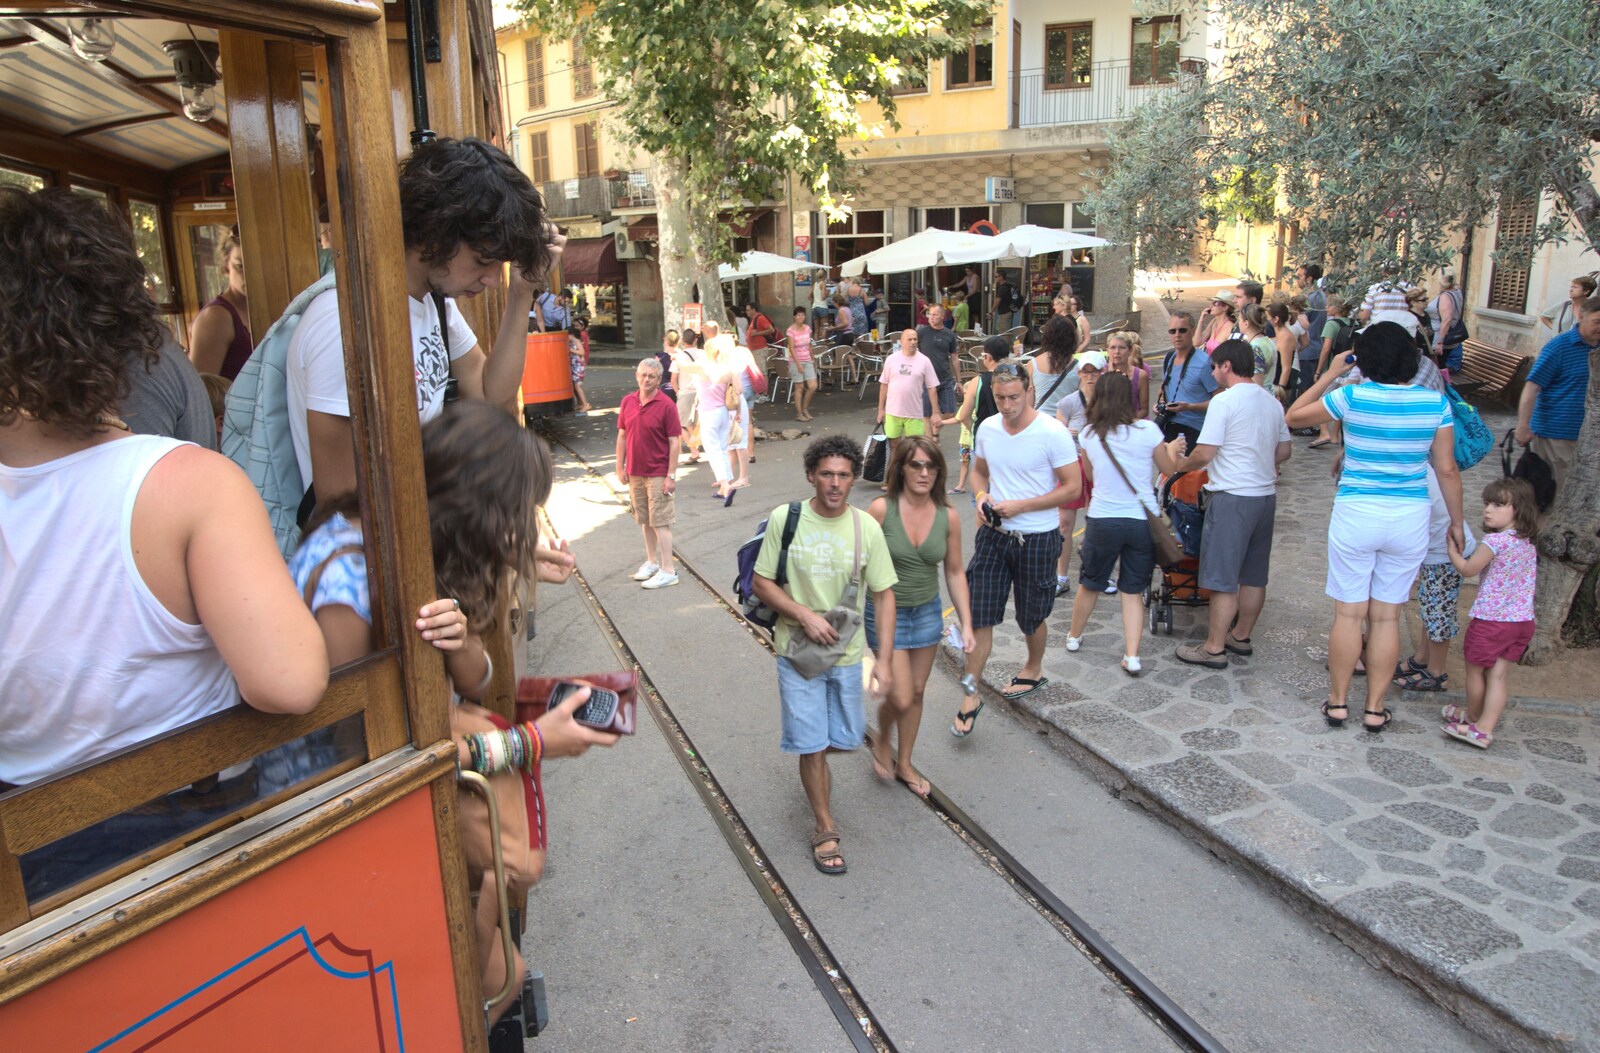 The tram trundles off from A Tram Trip to Port Soller, Mallorca - 18th August 2011